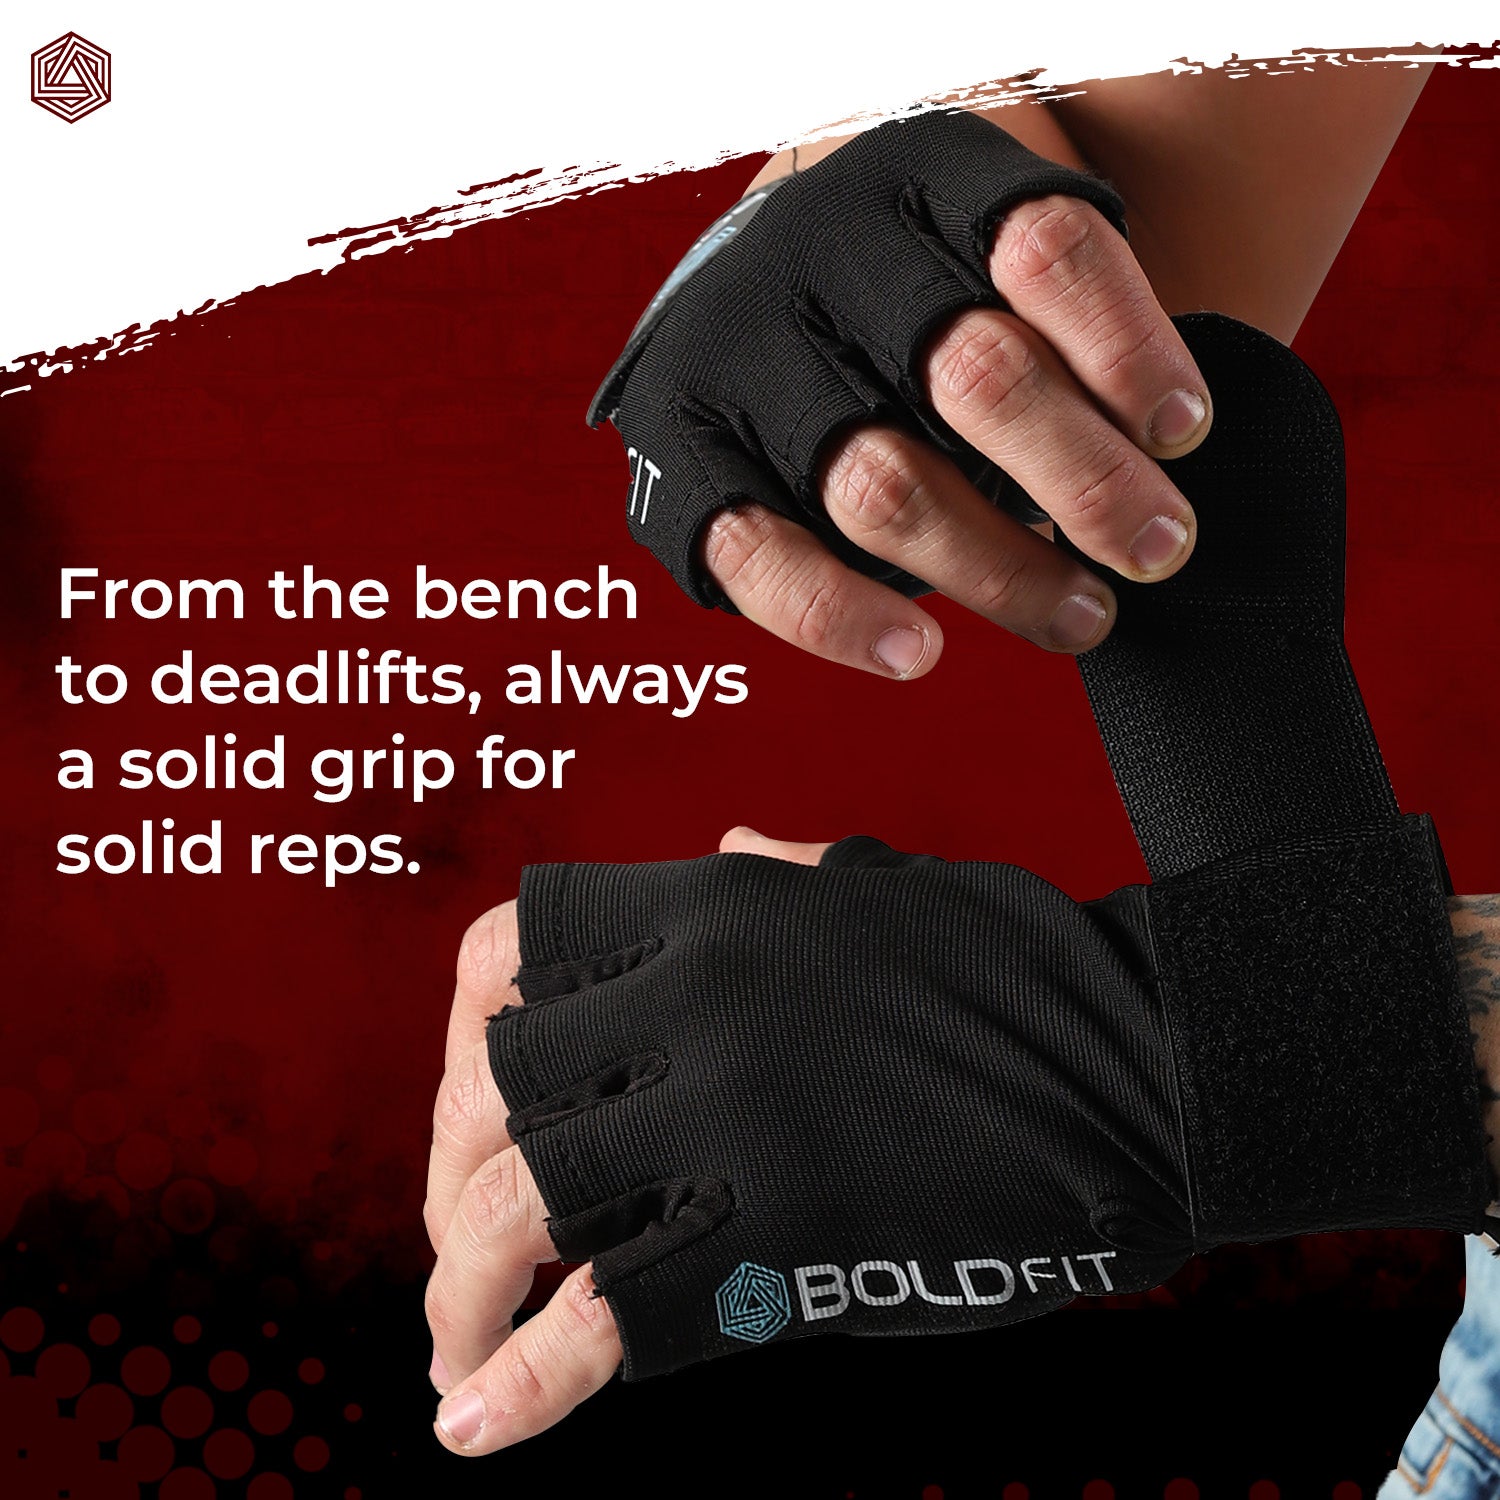 Gym Hand Gloves for Strong Grip- Warrior